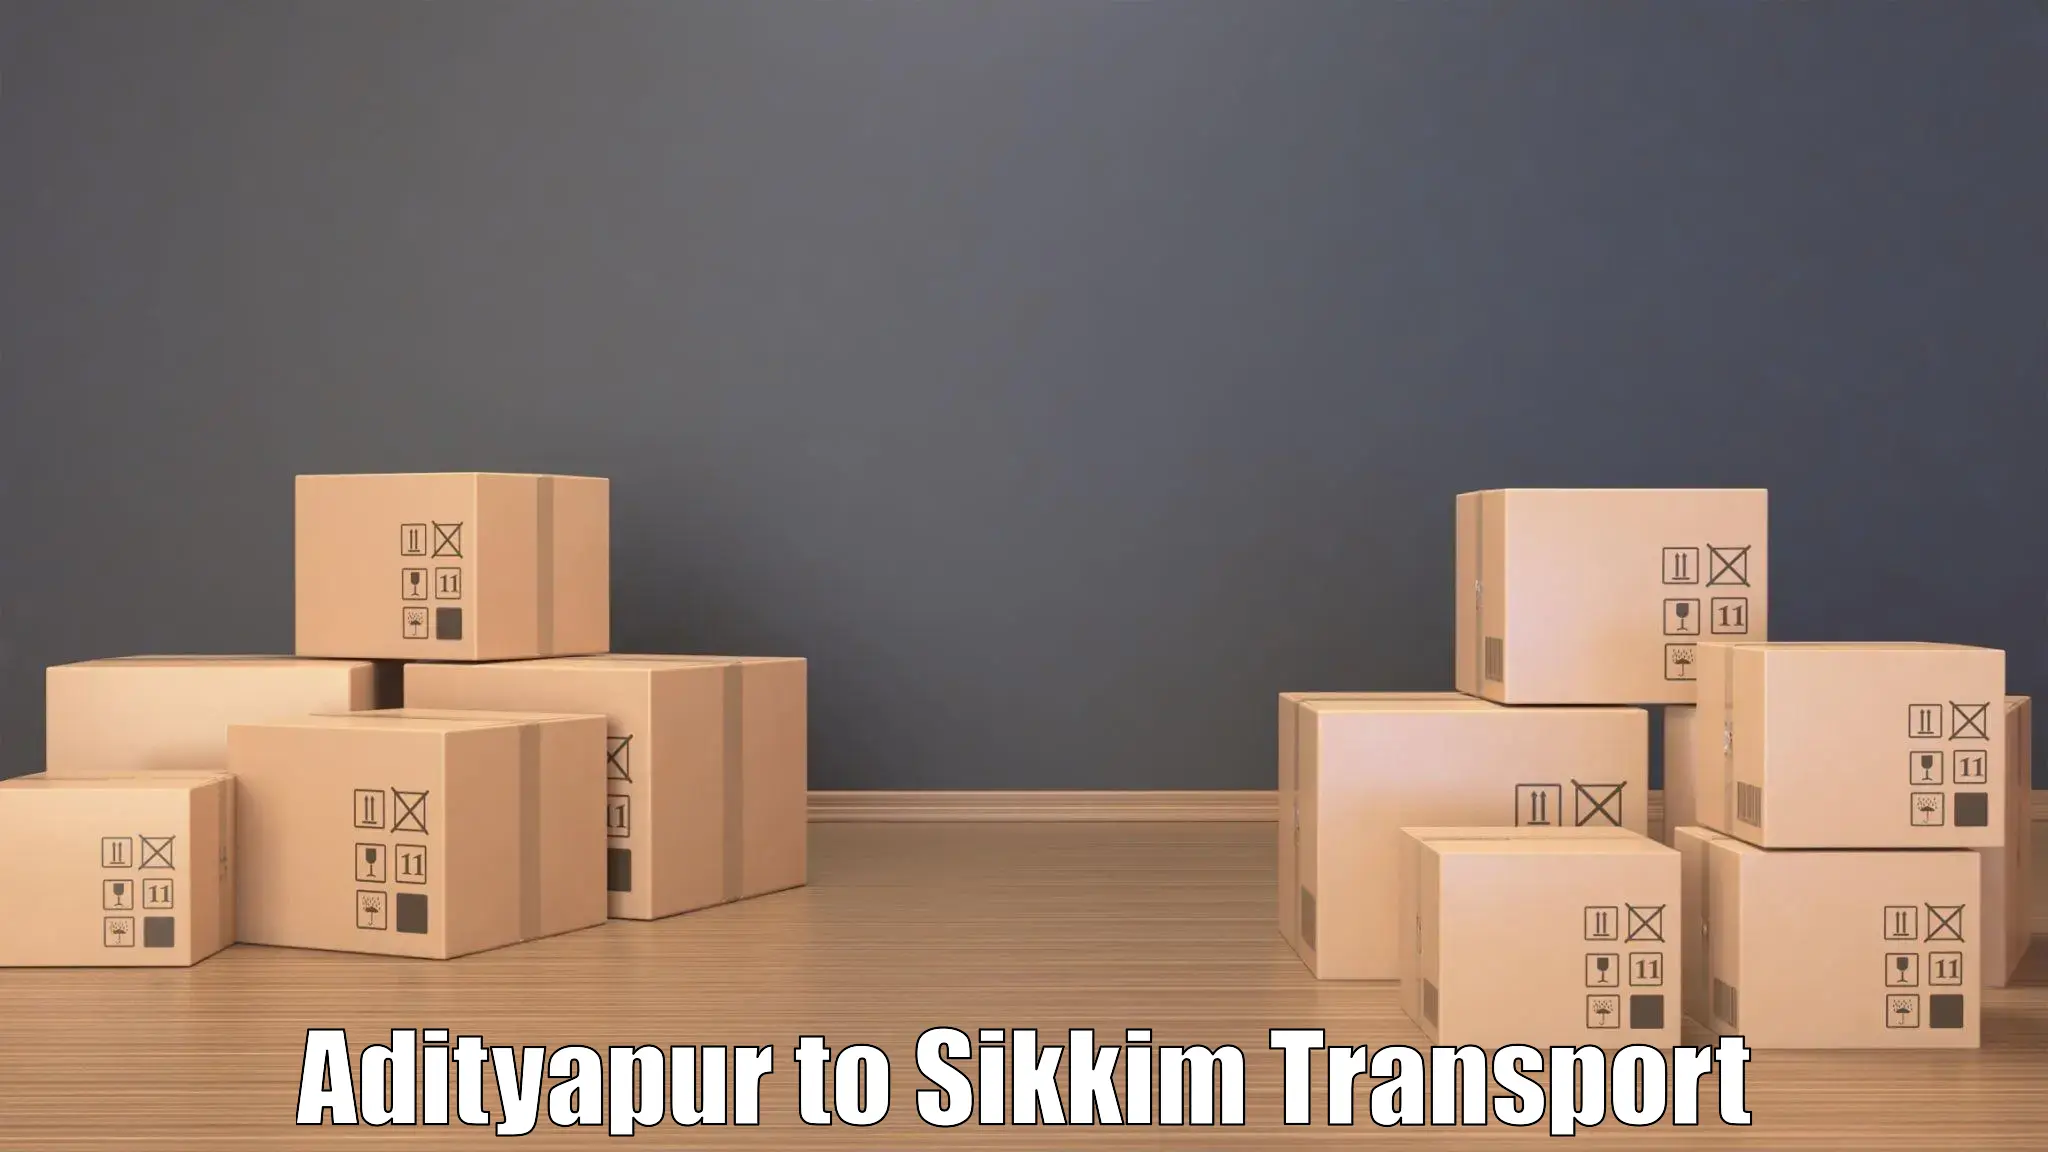 Container transport service Adityapur to Sikkim